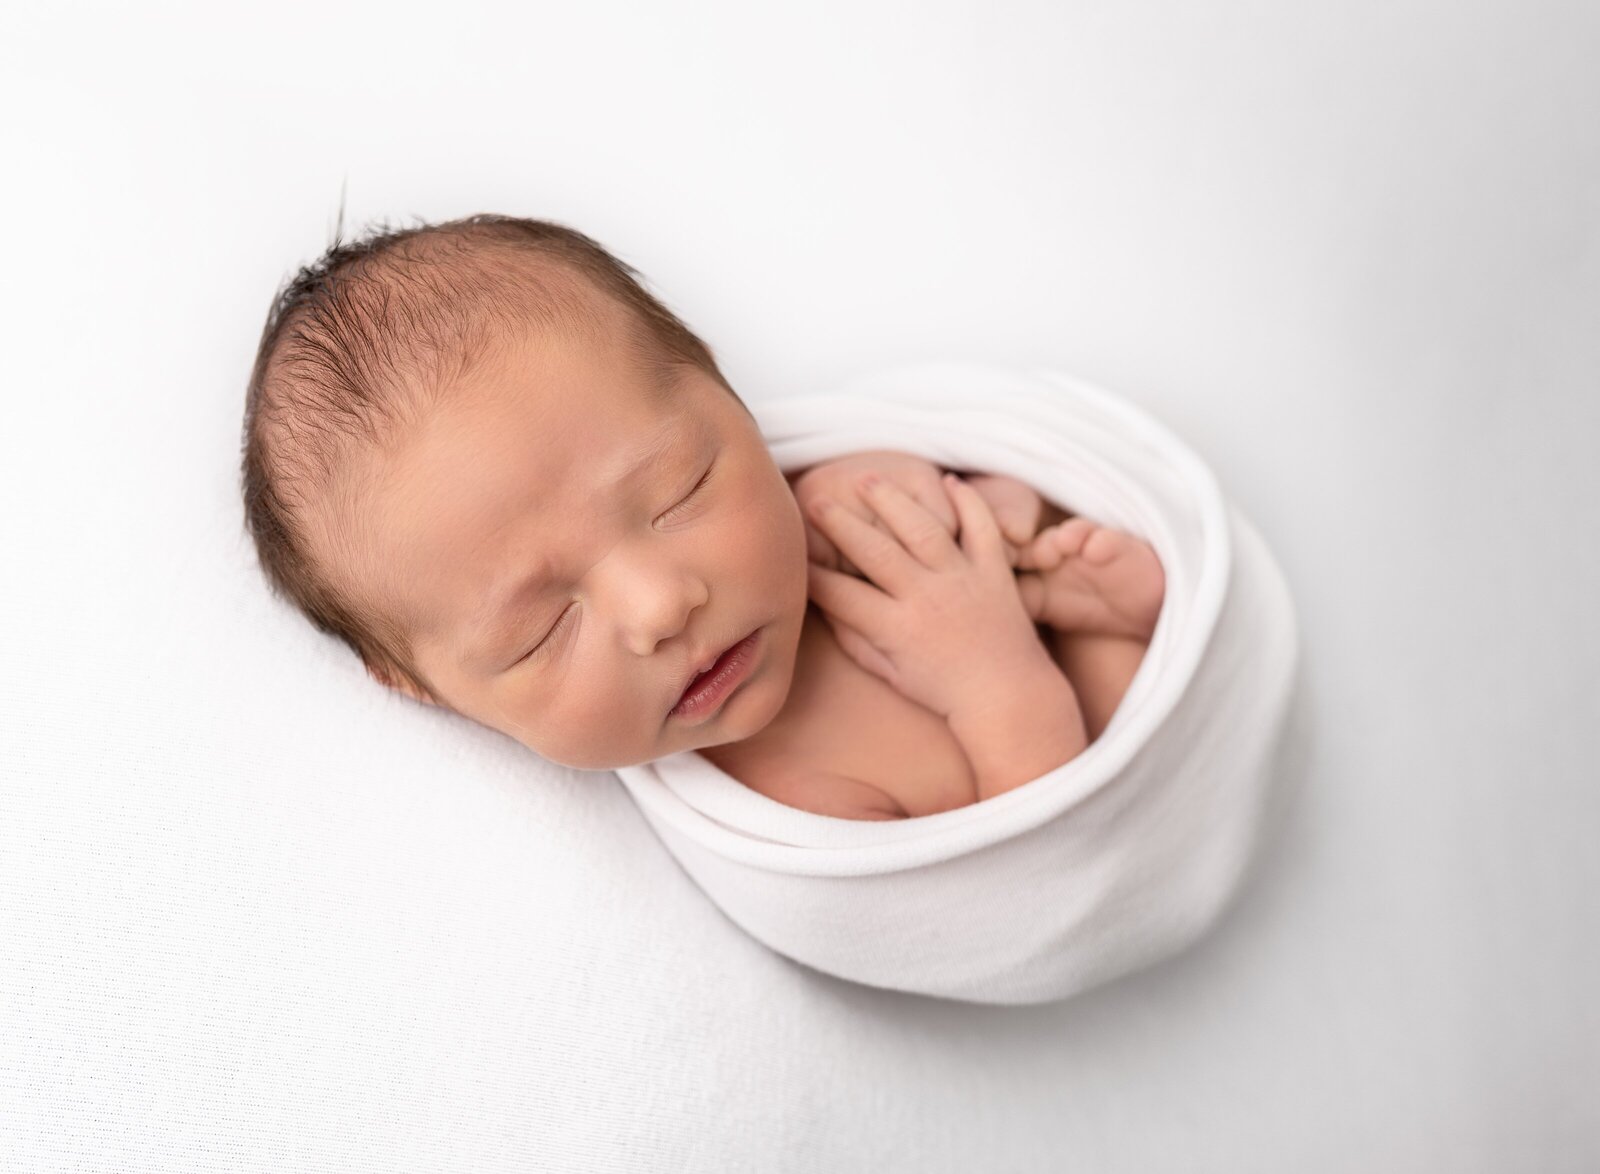 simple and modern photo of a baby on white